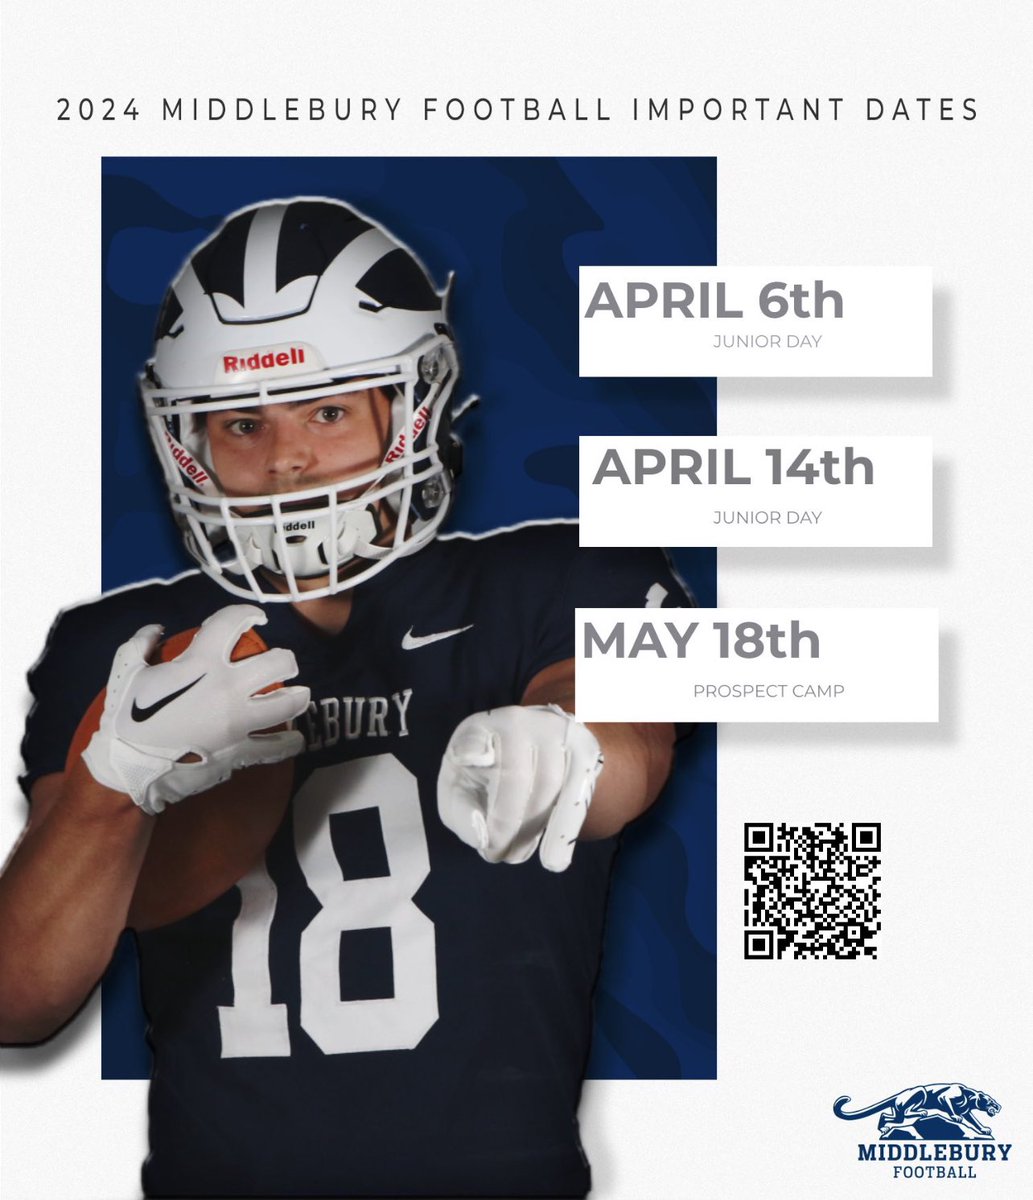 Mark your calendars‼️ Make sure to reach out to your recruiting coach to sign up for our Jr days. Less than 2 months until prospect camp, don’t miss a chance to camp with the champ💍 #1-0